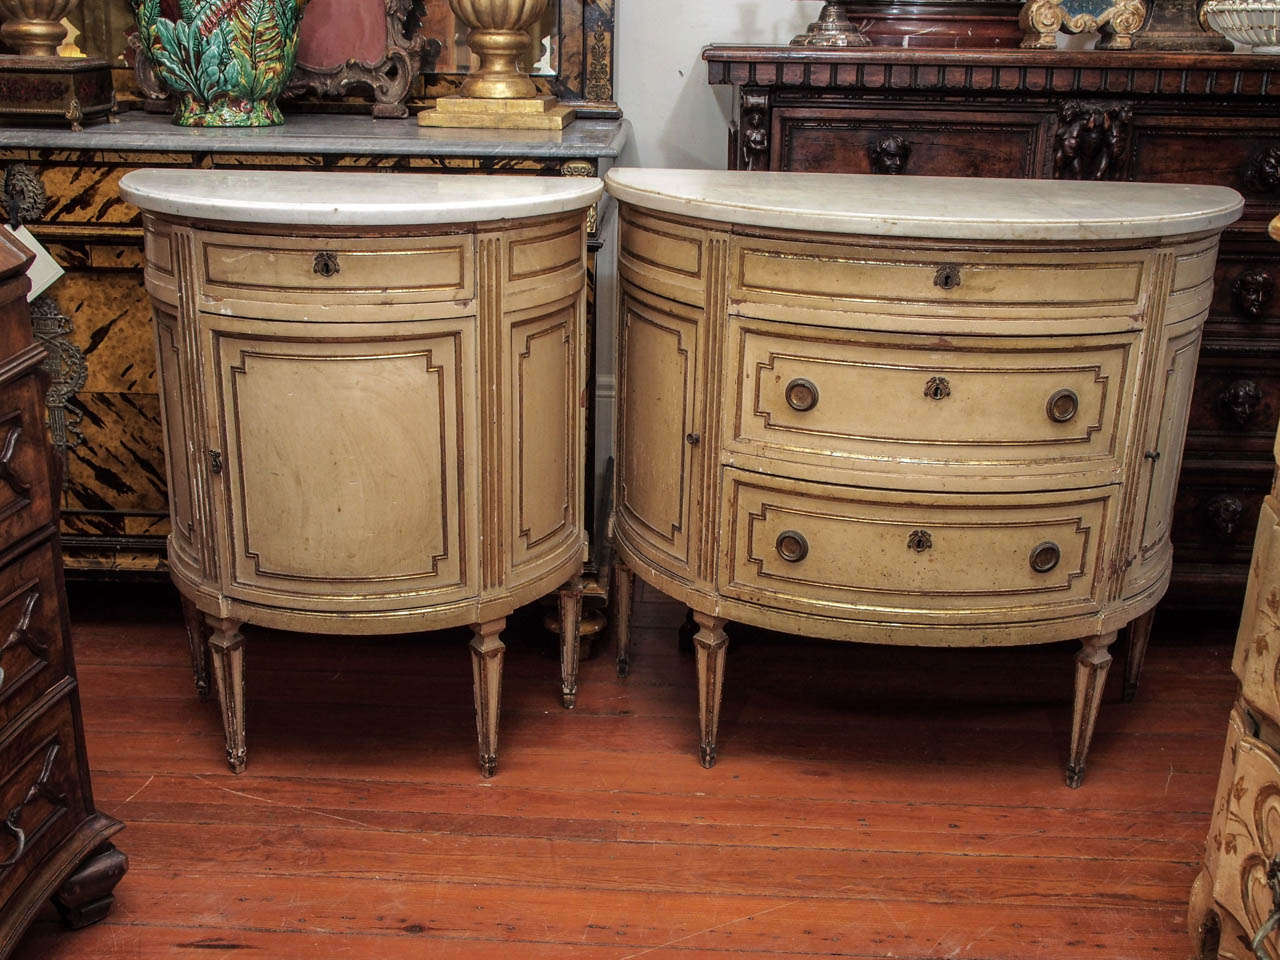 Suite of two Italian Luigi XVI Painted and Parcel gilt Demi Lune Cabinets , one with three drawers and to doors and one with one drawer and one door. both with marble tops. Size of the smaller one is 25.5 inches wide x 13.75 inches deep x 31.75